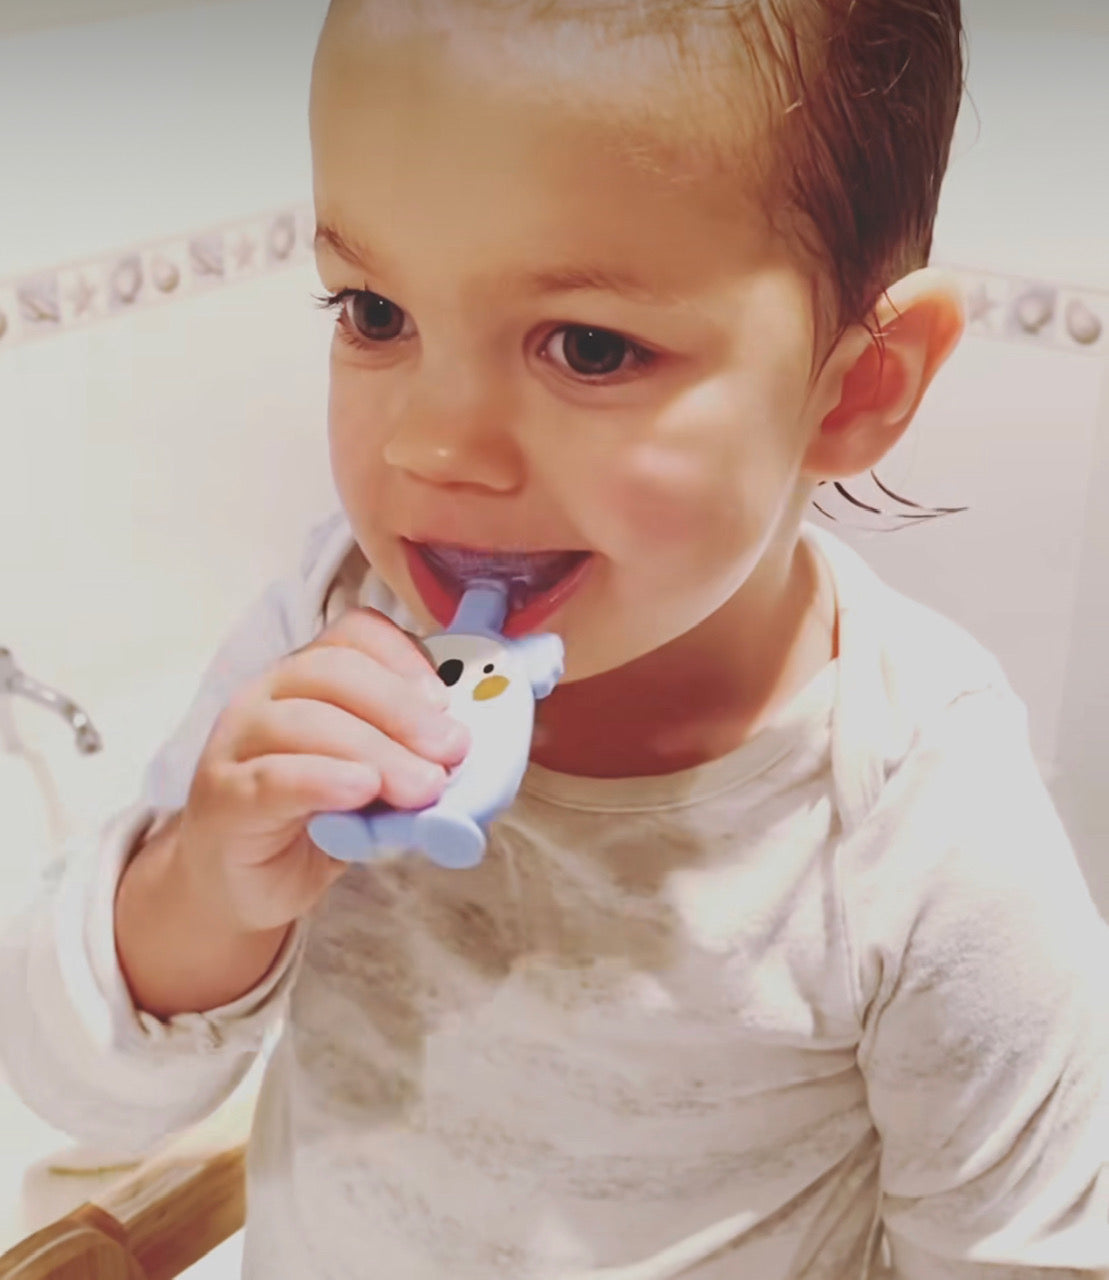 U-Shaped Silicone Toothbrush for Gentle Kids' Oral Care